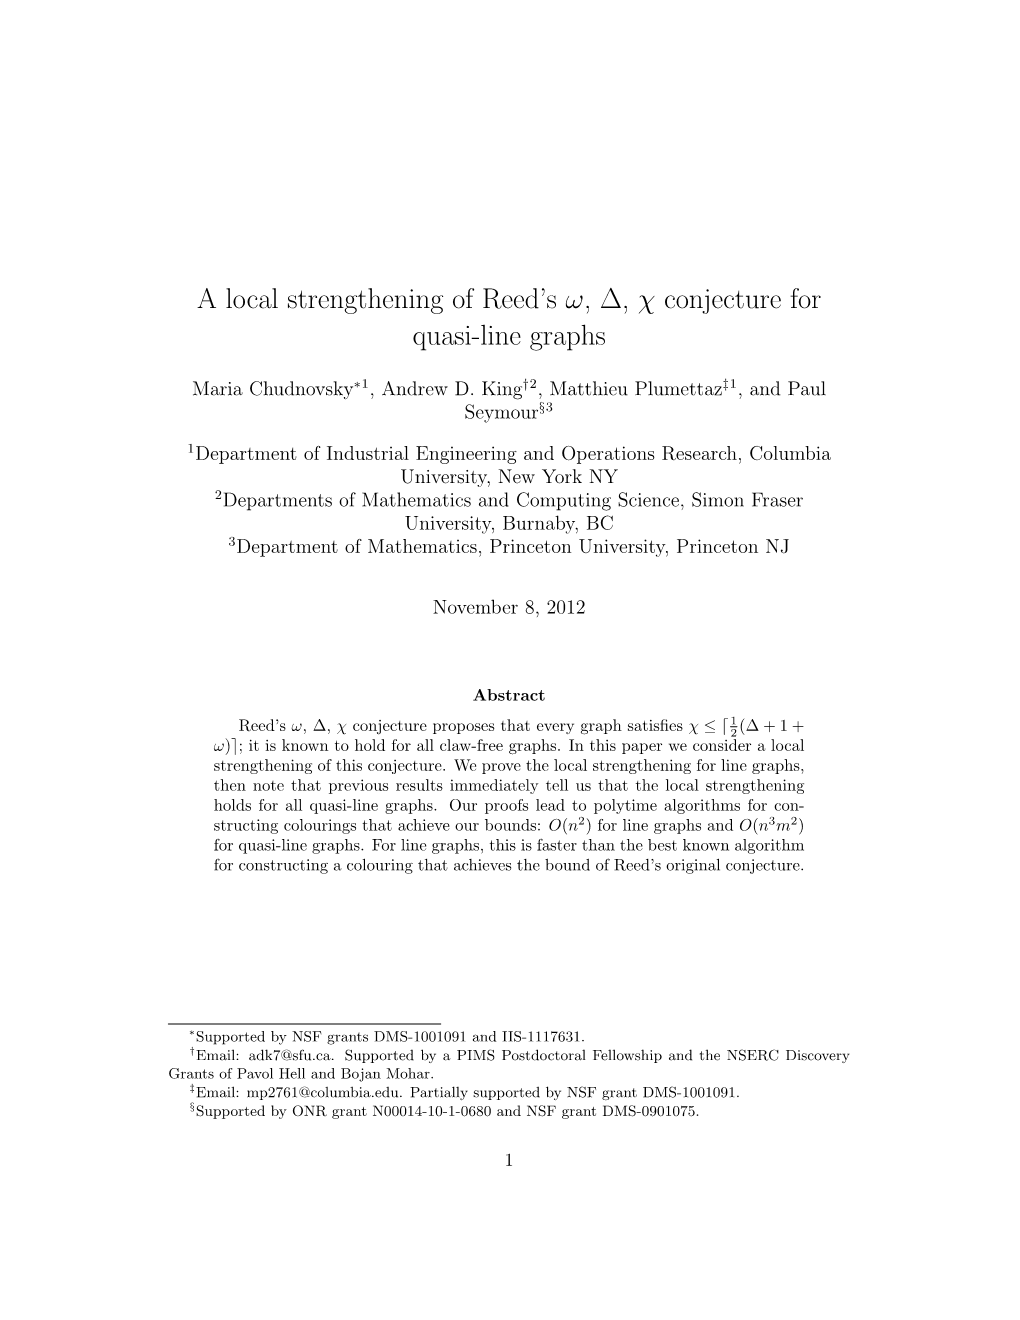 A Local Strengthening of Reed's Ω, ∆, Χ Conjecture for Quasi-Line Graphs